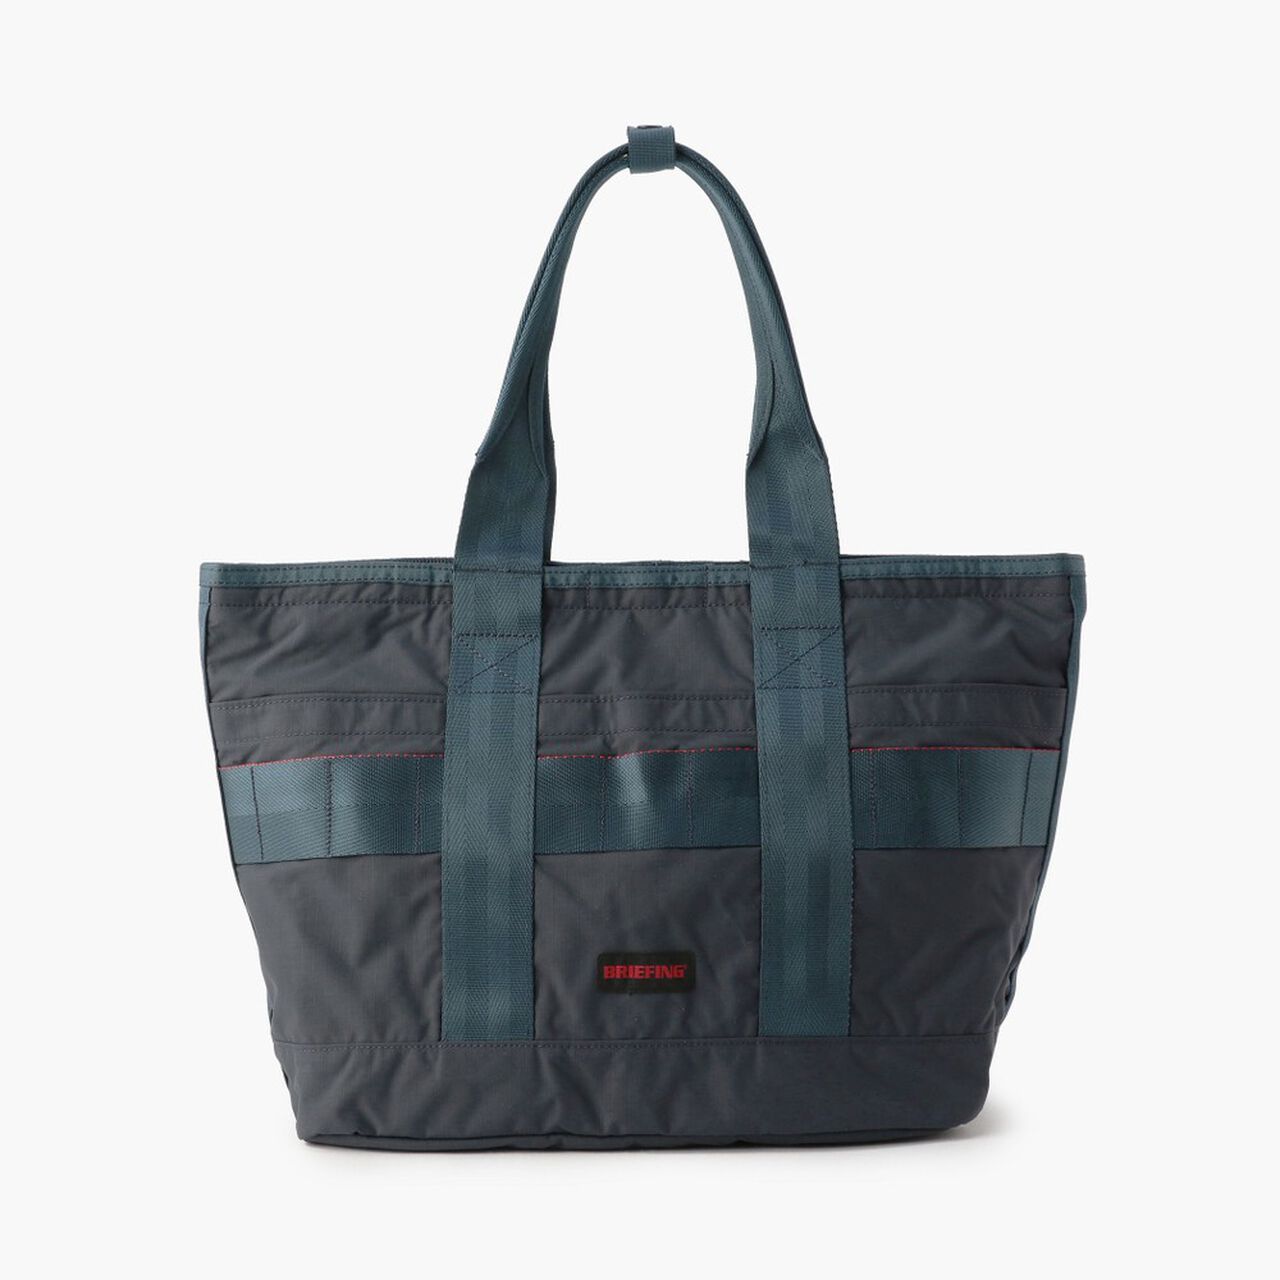 DISCRETE TOTE M MW,Navy, large image number 0